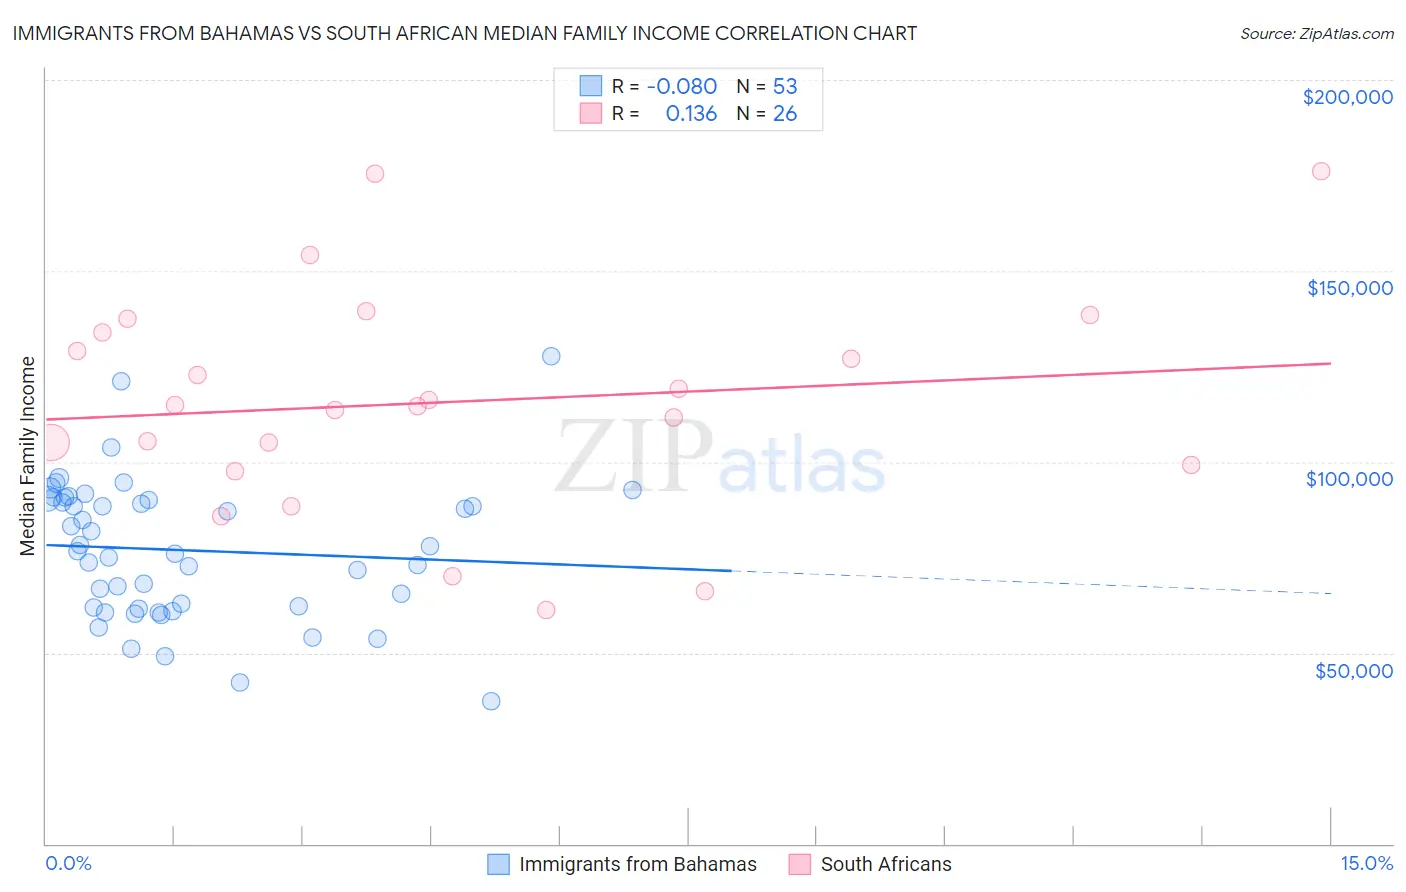 Immigrants from Bahamas vs South African Median Family Income